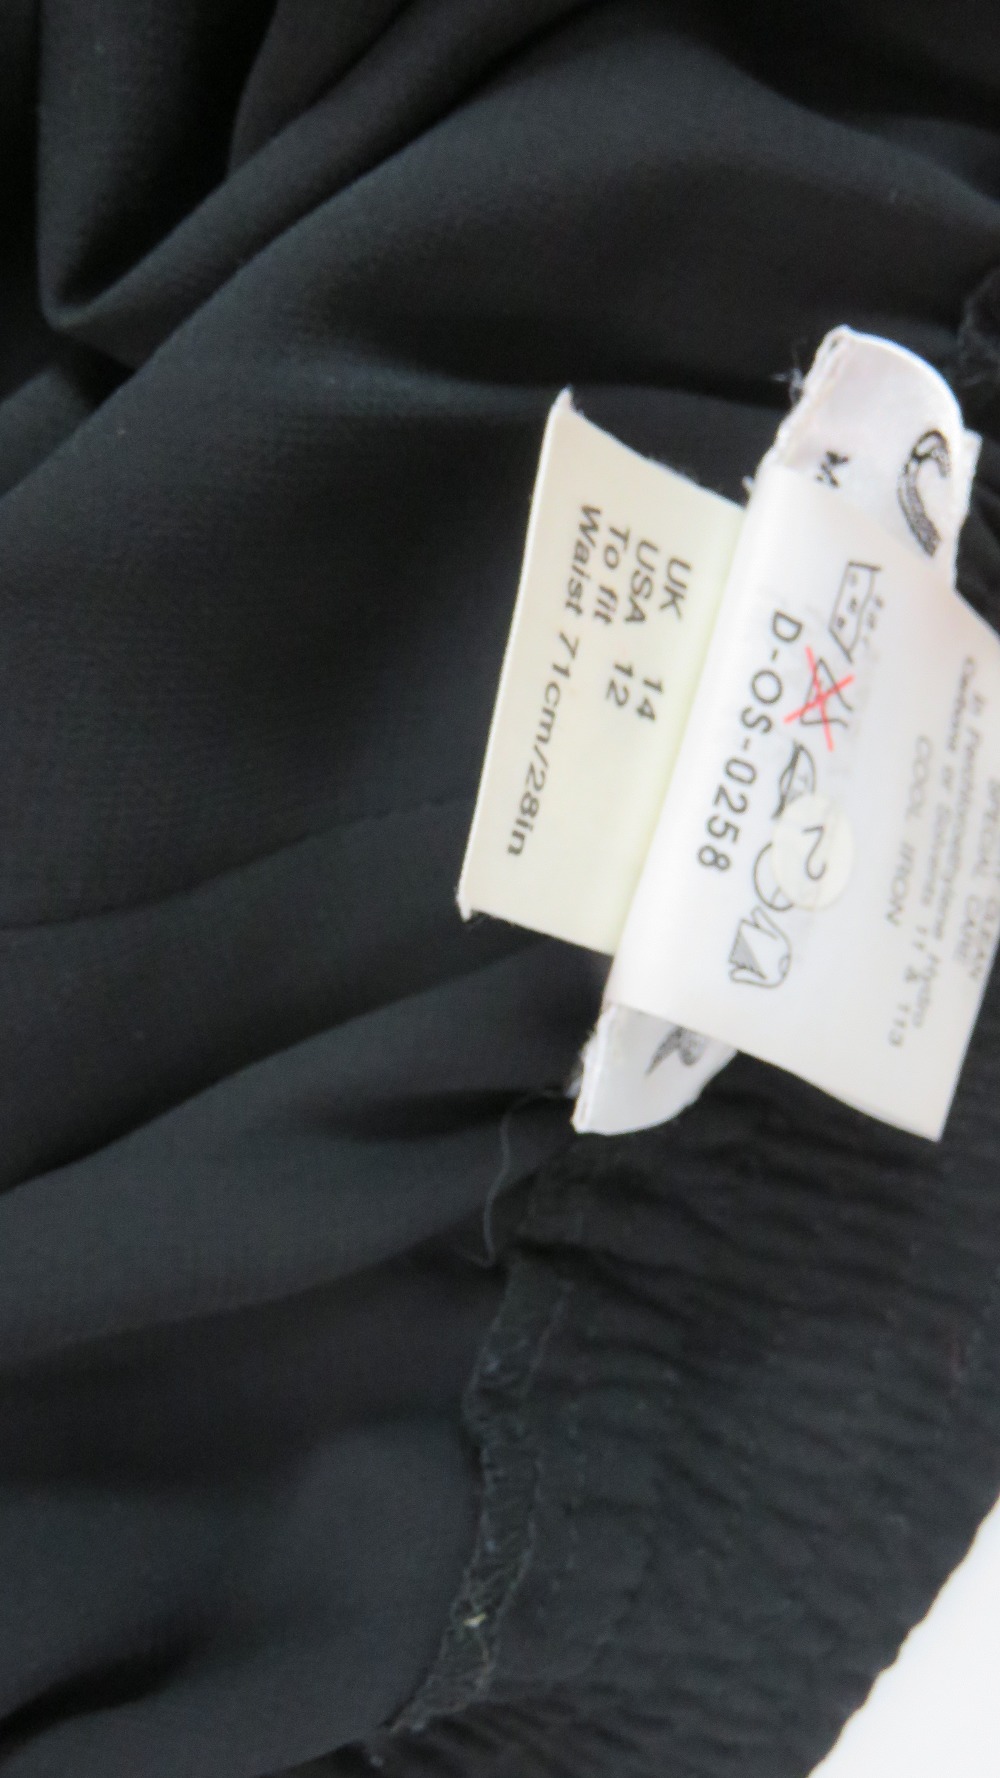 Jaeger; A black velvet and 'gold brocade' jacket, dry clean only label within, UK size 14. - Image 6 of 7